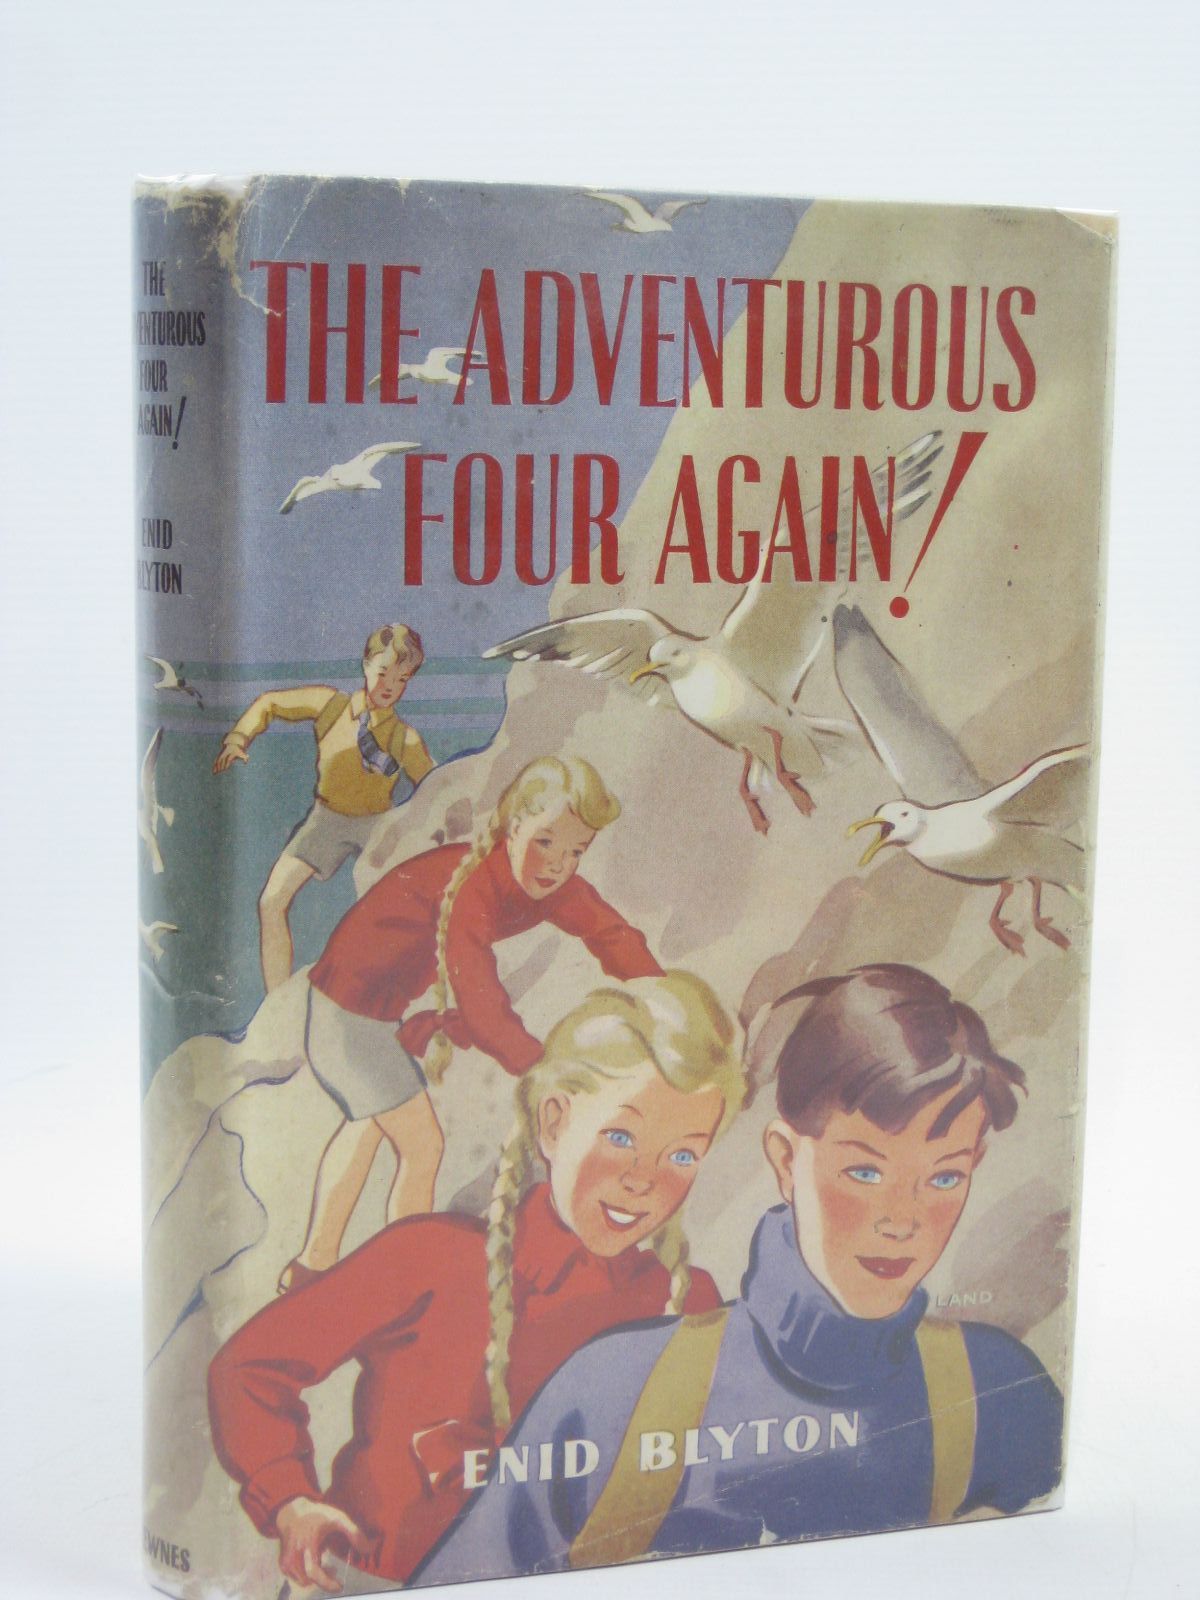 Cover of THE ADVENTUROUS FOUR AGAIN! by Enid Blyton